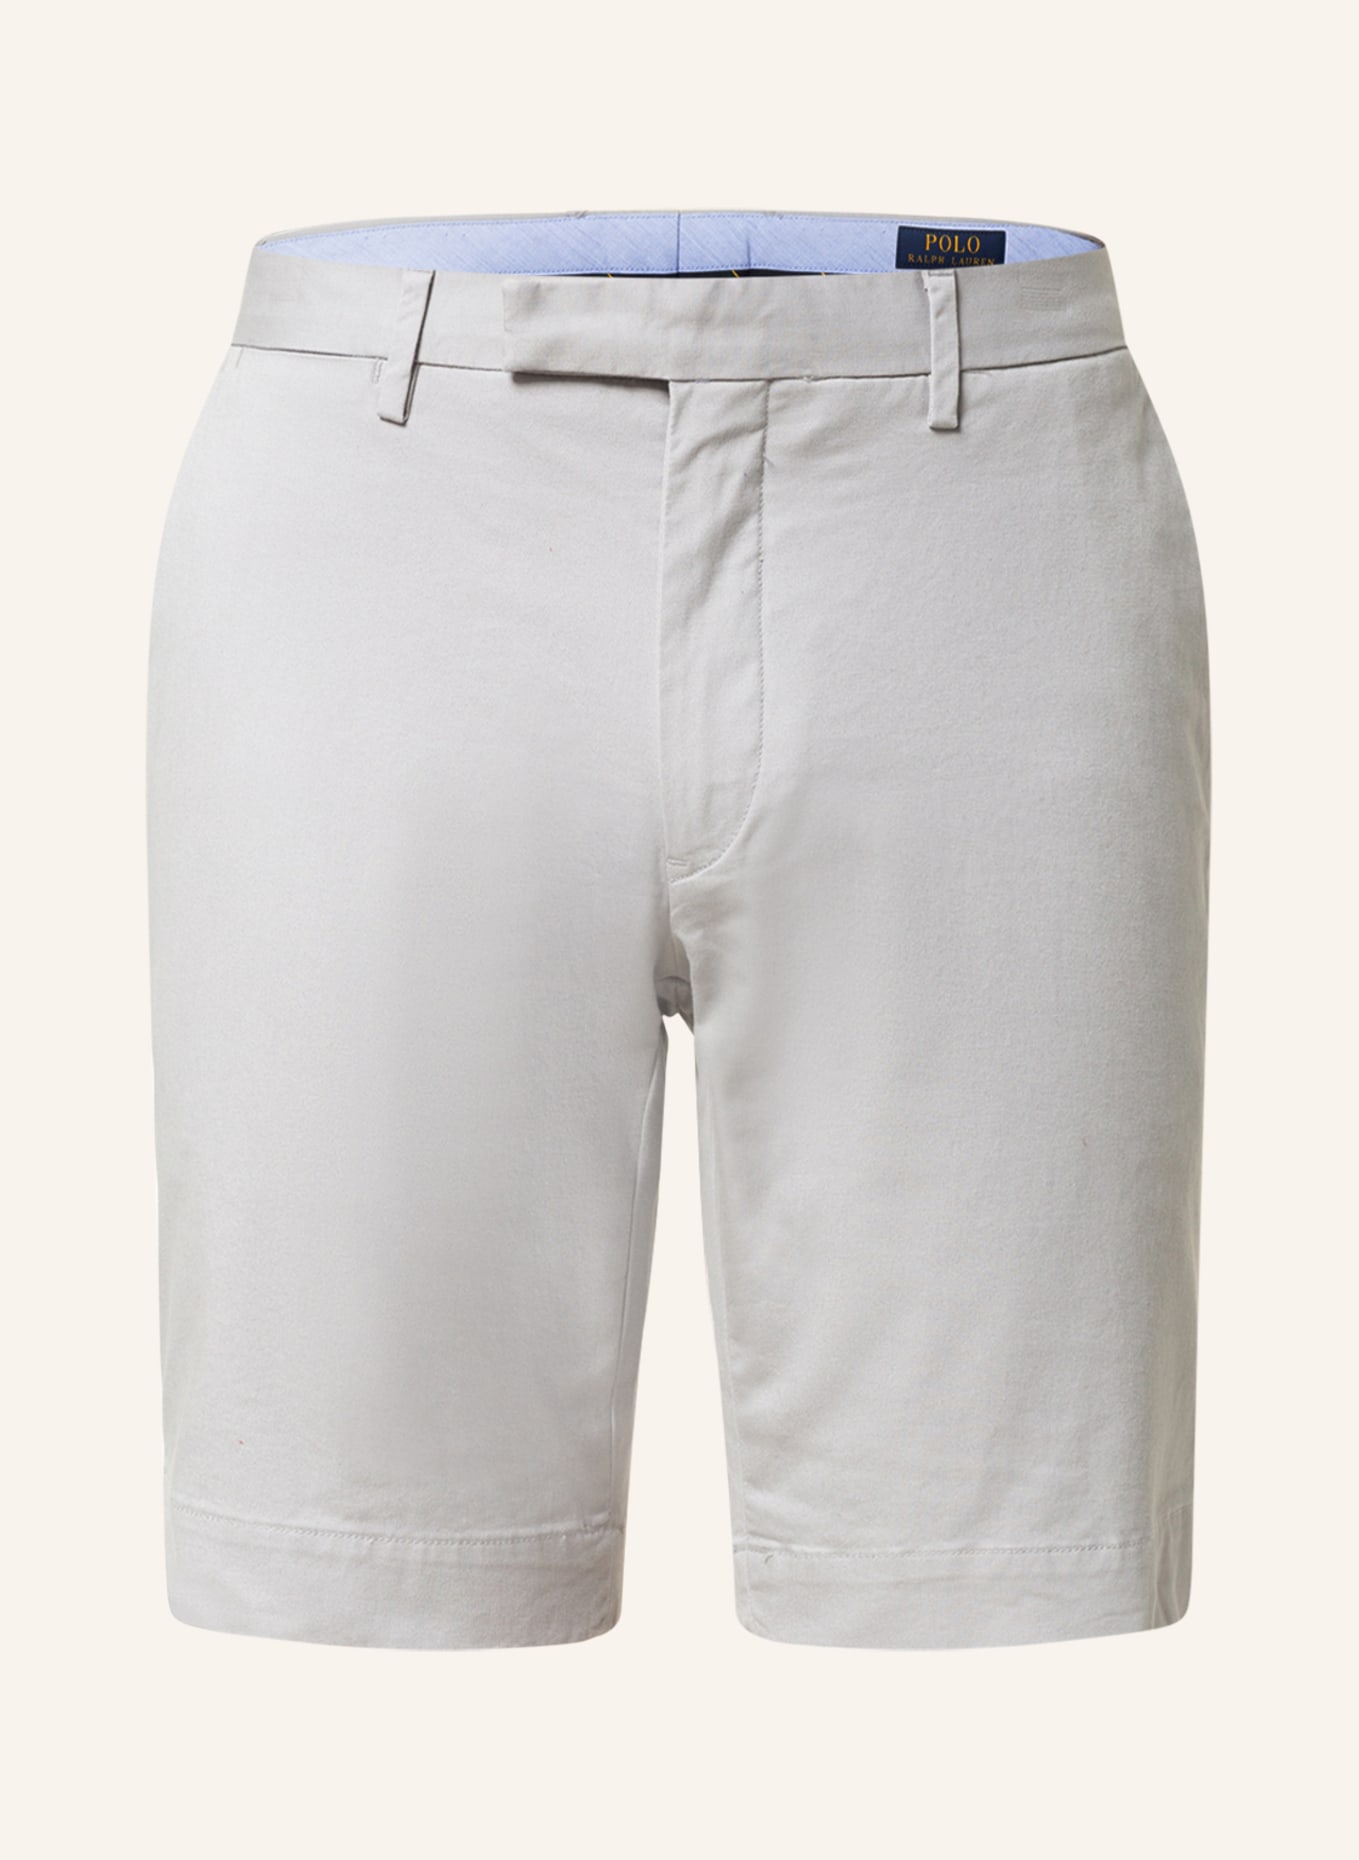 POLO RALPH LAUREN Chino shorts HUDSON slim fit, Color: GRAY (Image 1)